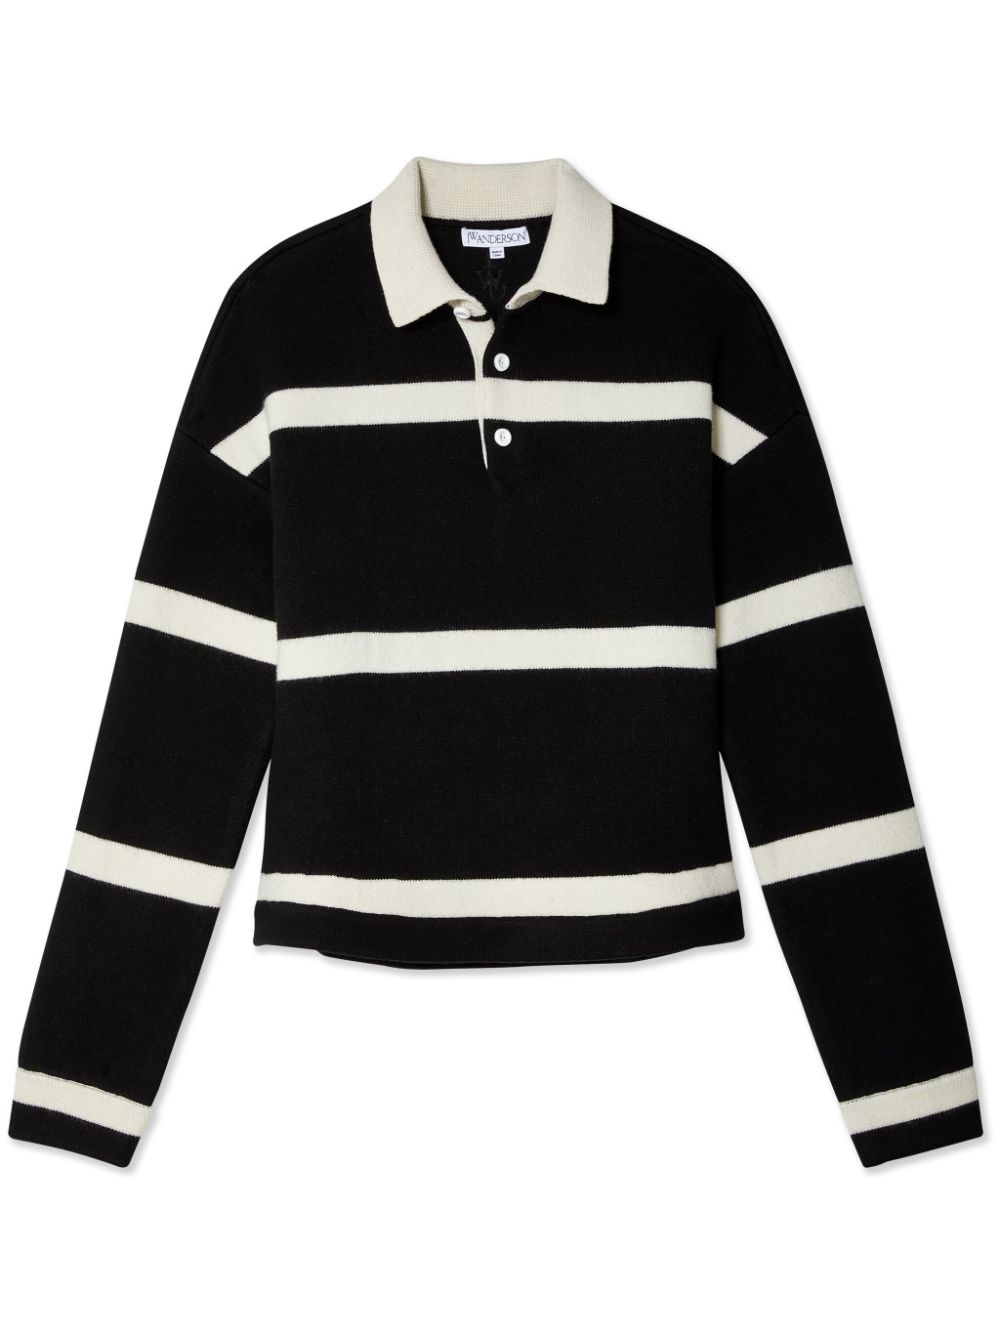 JW Anderson striped wool-blend polo top - Black